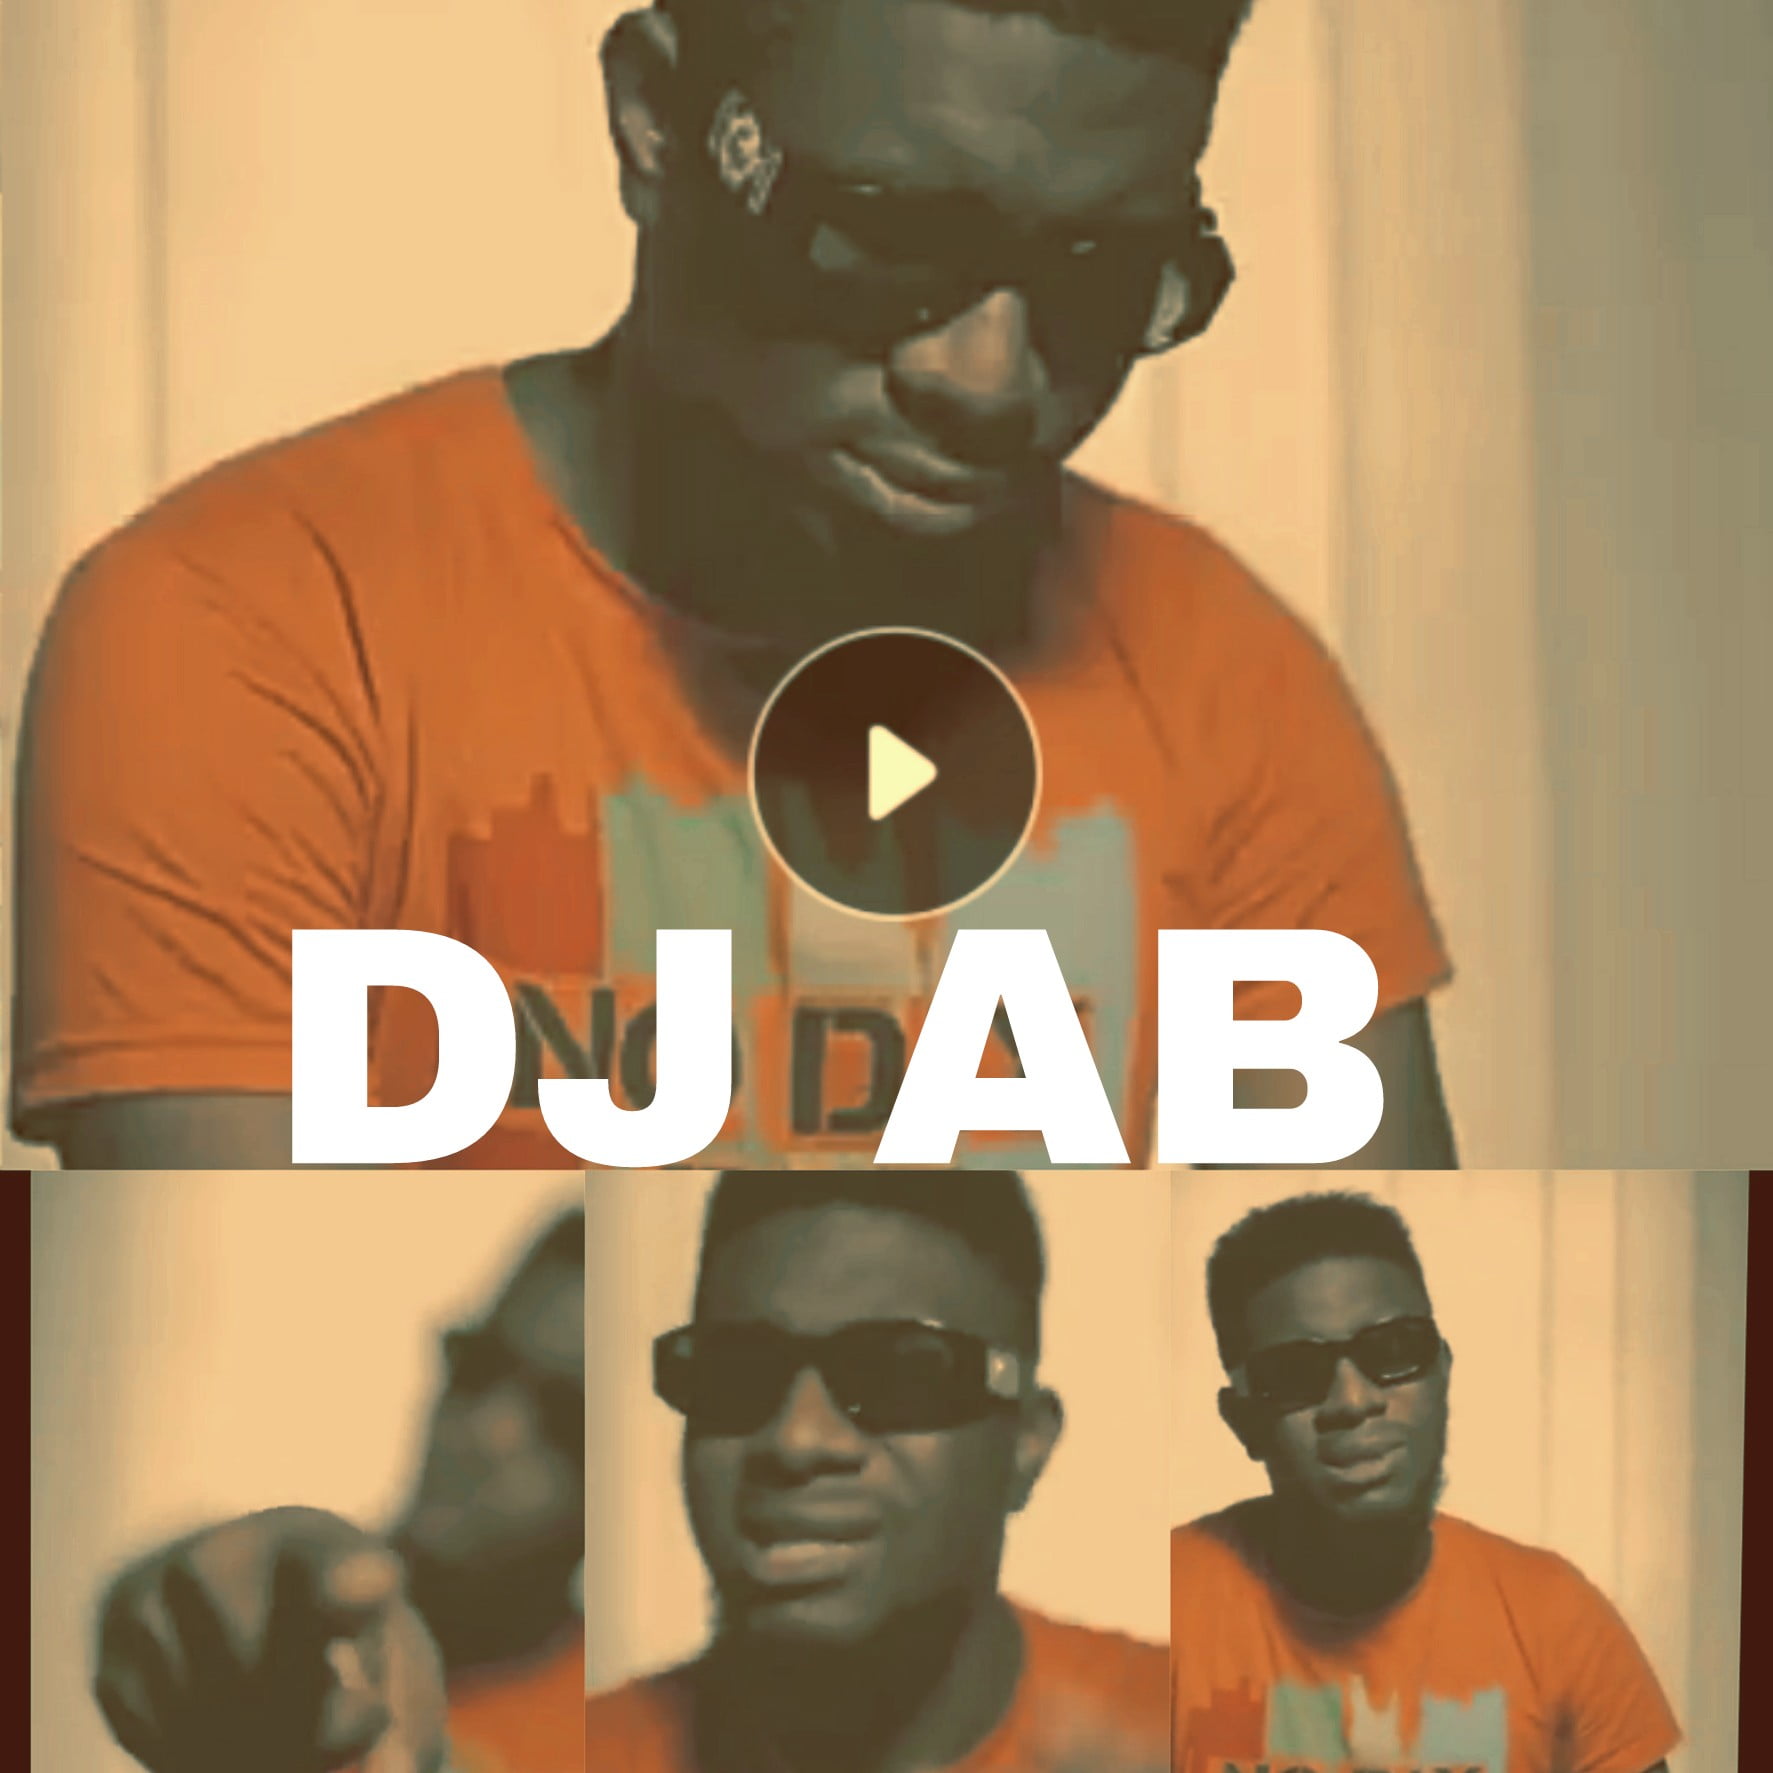 VIDEO: Dj AB mercilessly killed new beat with a hot Rap style - The path that I chose is you